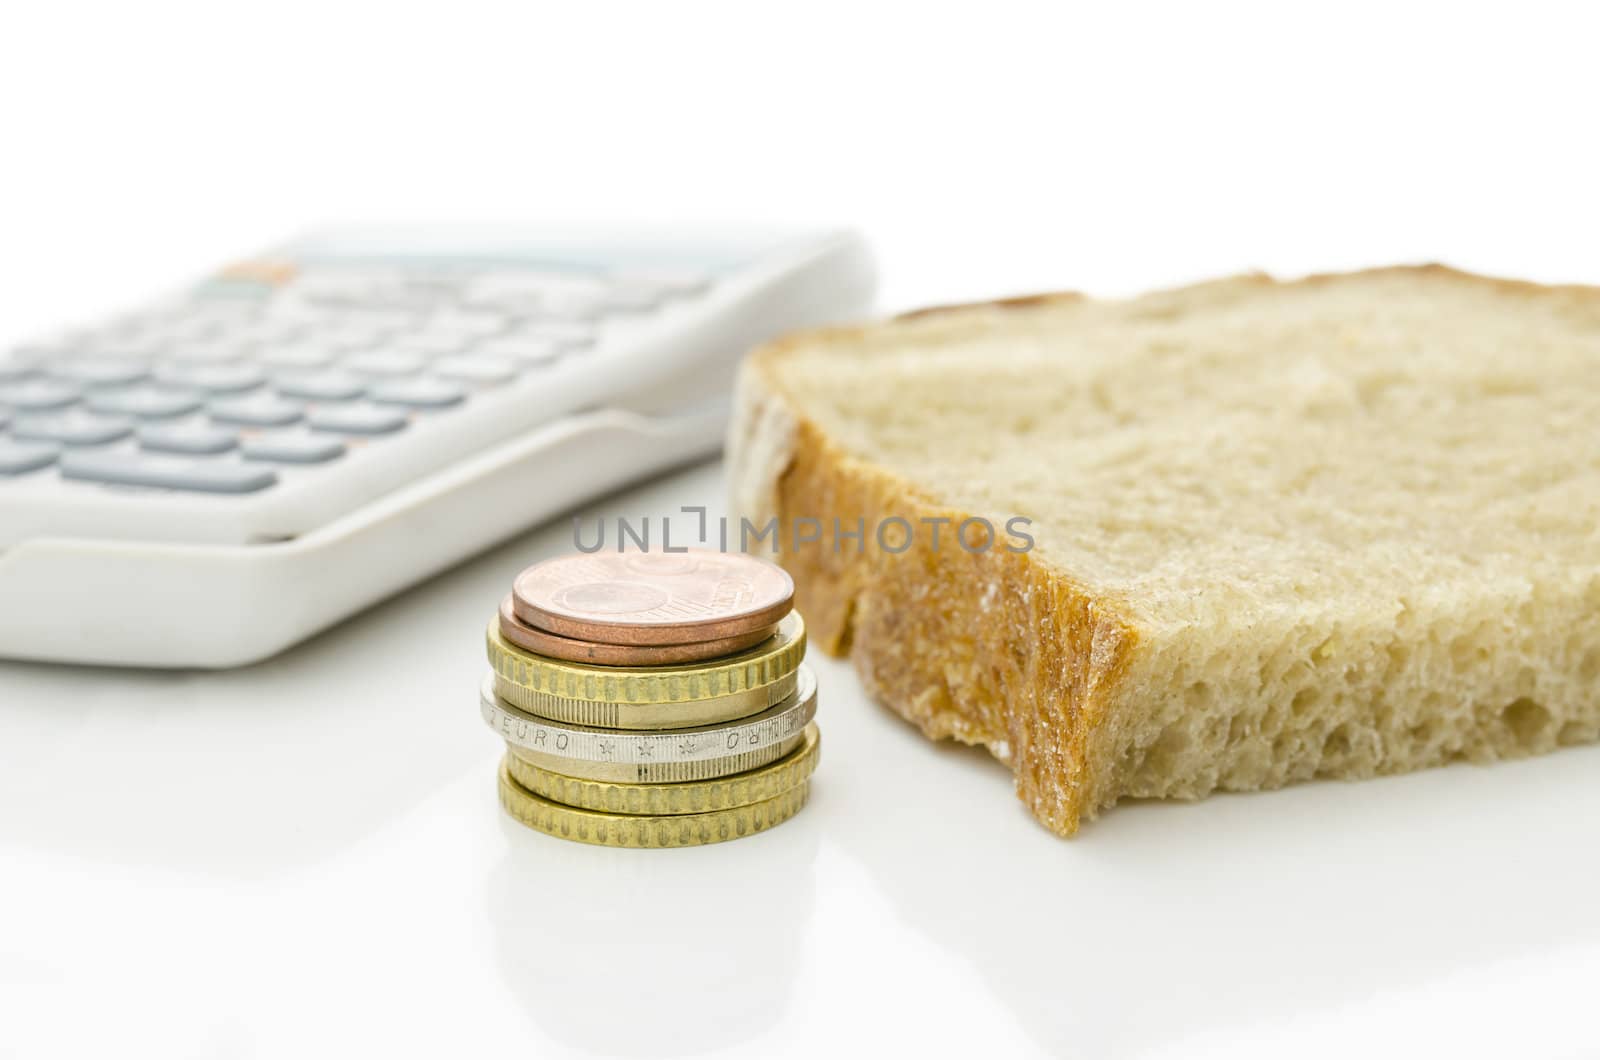 Slice of bred, Euro coins and calculator on a white desk. Concept of saving every cent in order to get through the month.